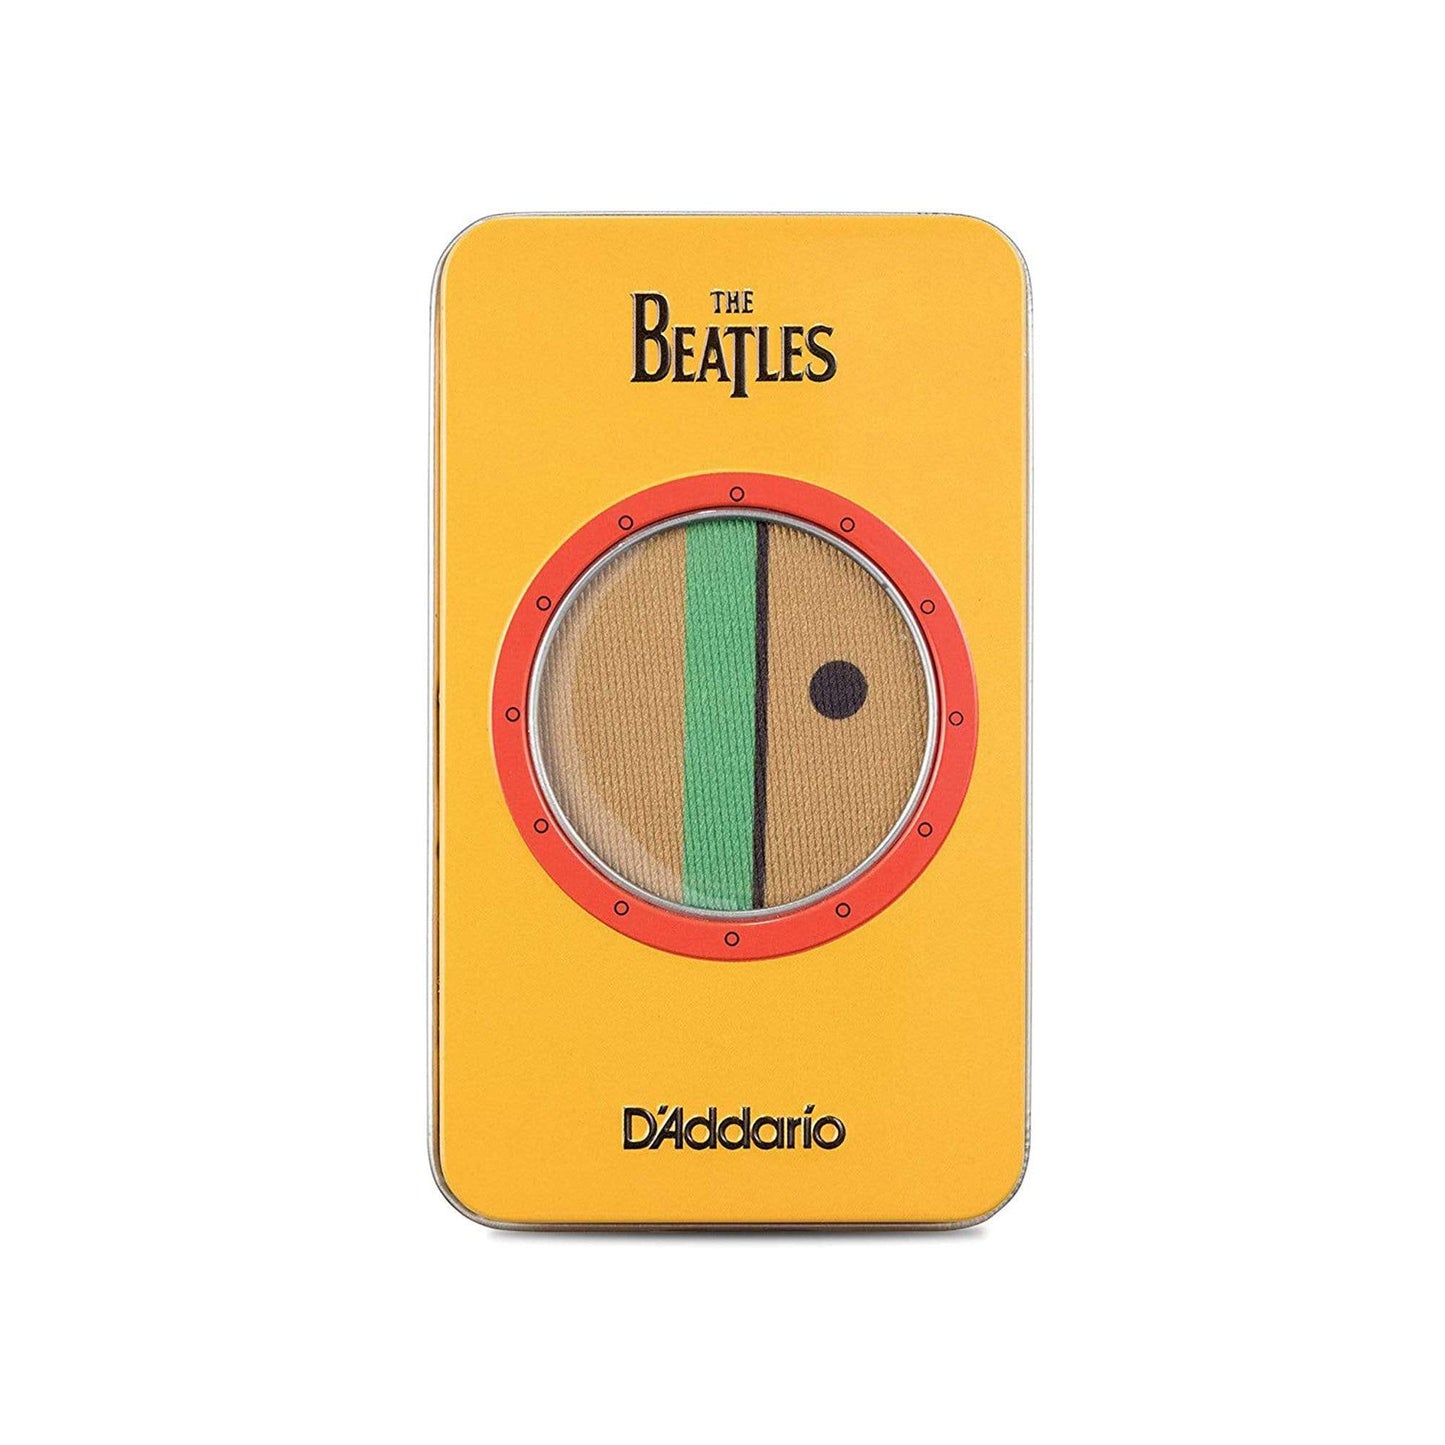 D'Addario Beatles Yellow Submarine 50th Anniversary Guitar Strap "George" w/Collectible Tin Accessories / Straps